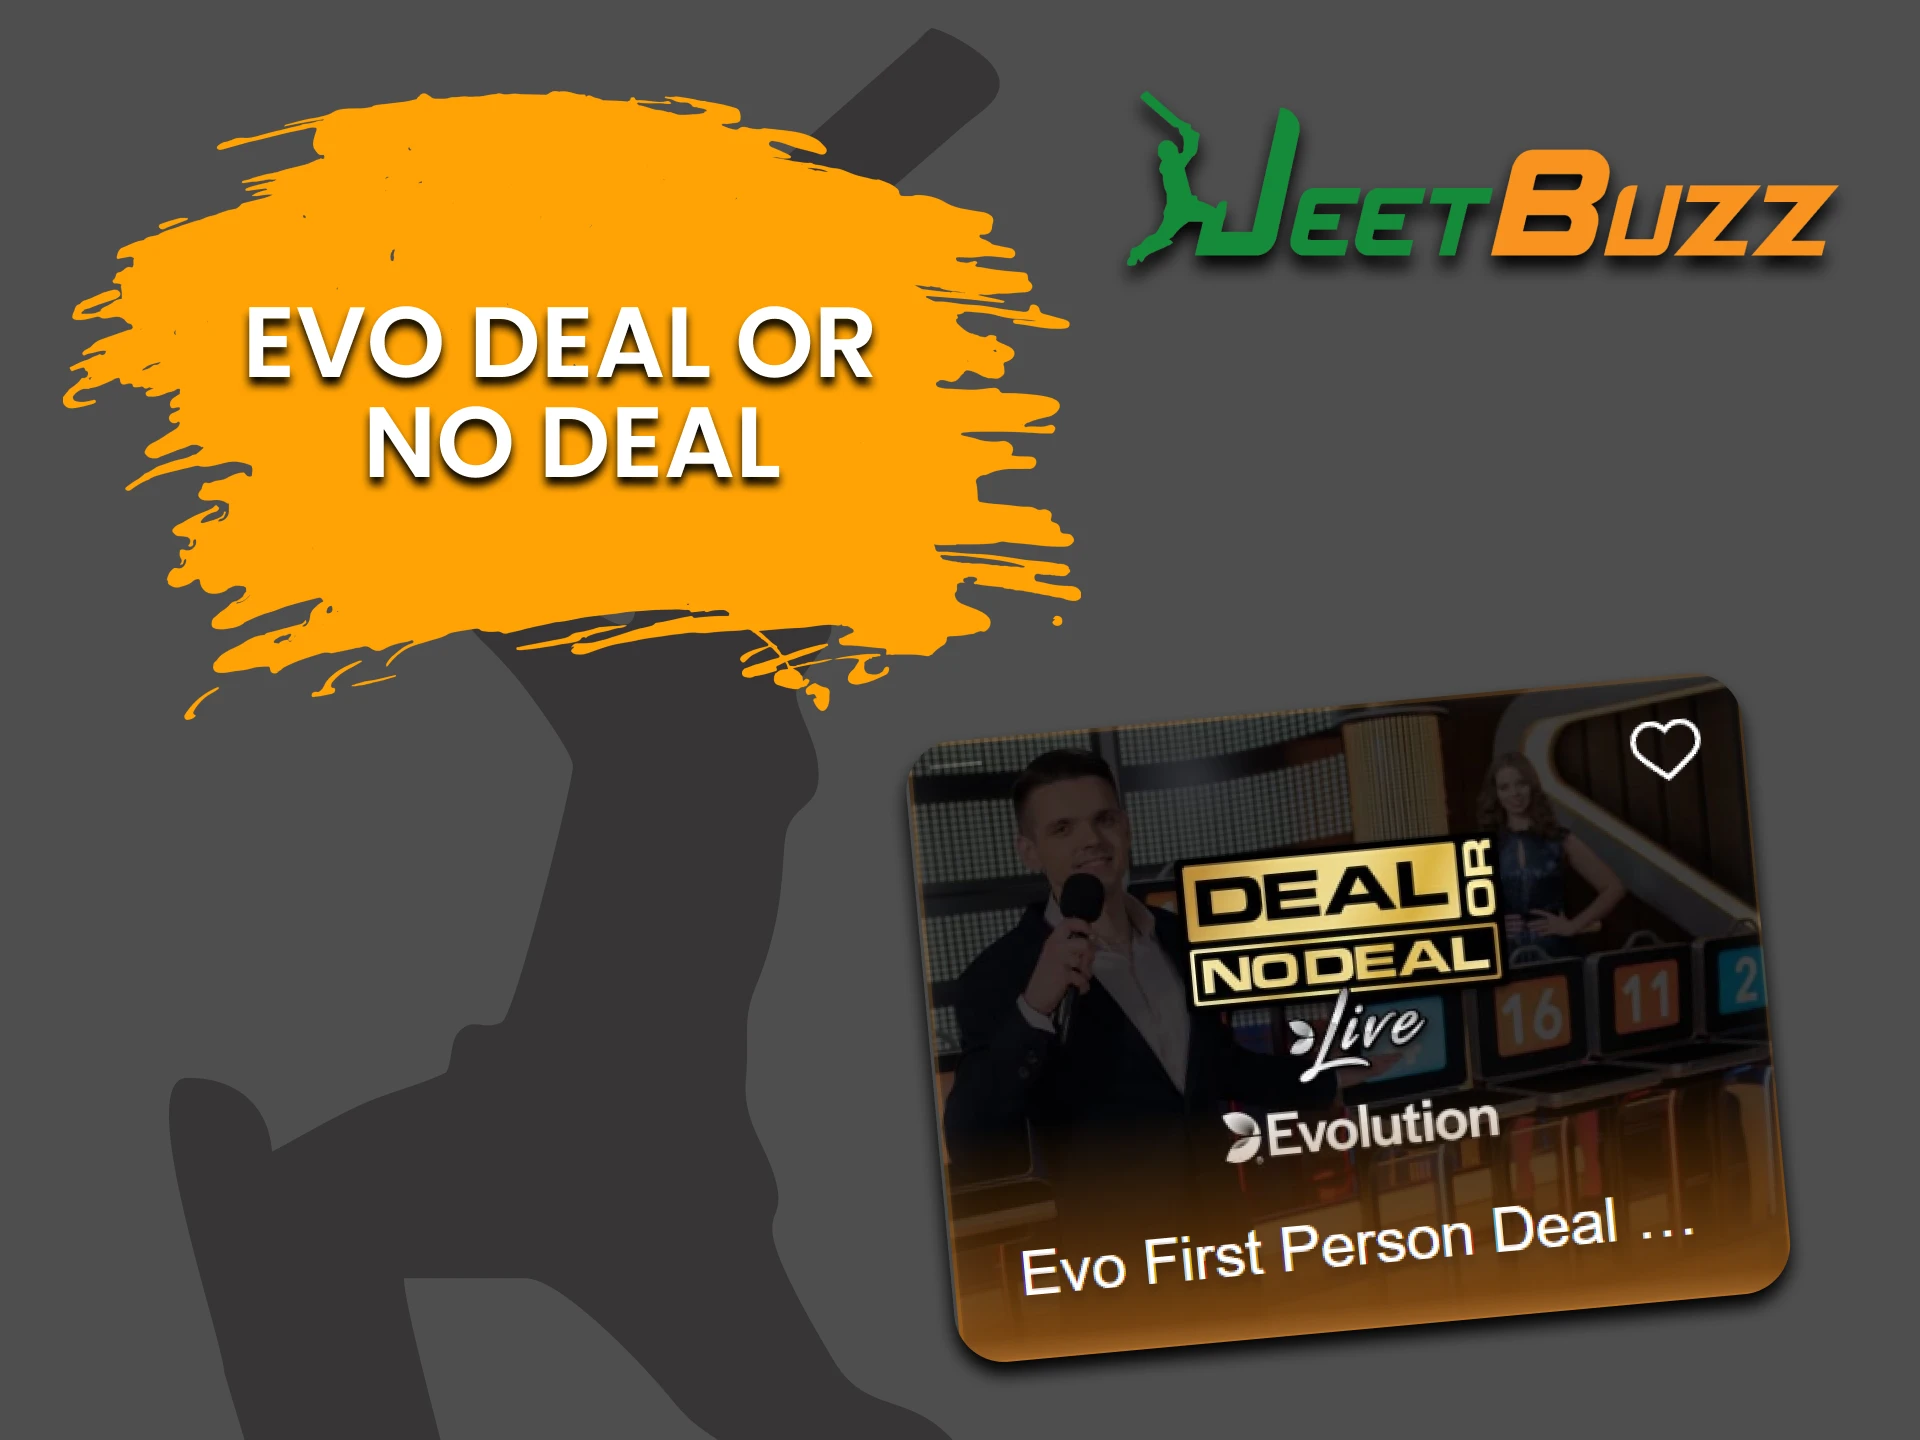 To play Jeetbuzz's Game Show, select "Evo Deal or No Deal".